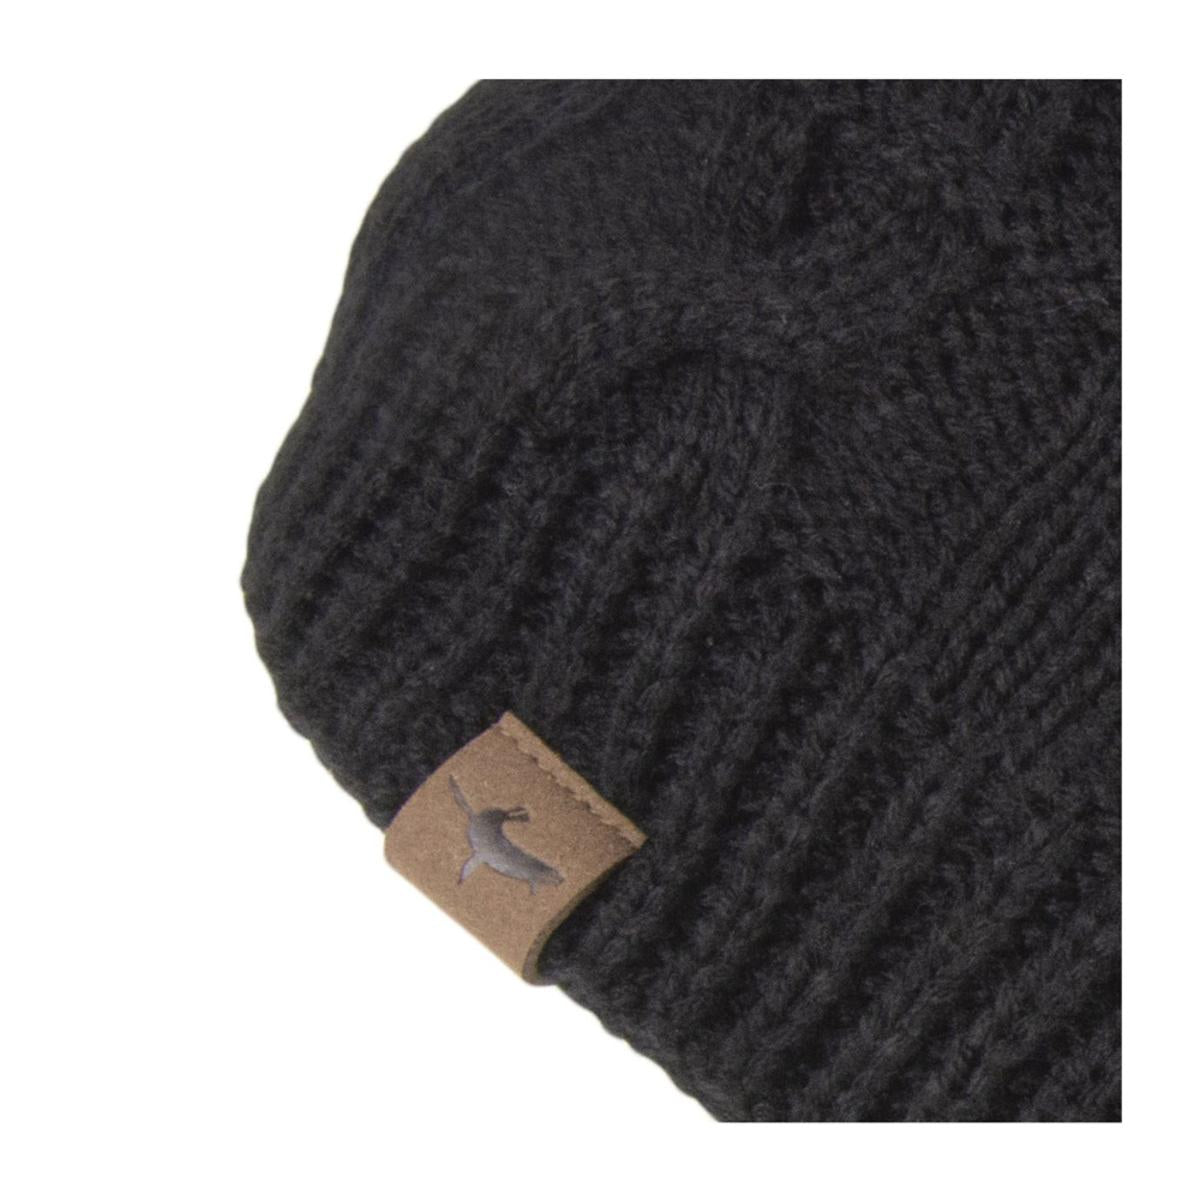 Sealskinz Men's Waterproof Cold Weather Cable Knit Beanie Hat